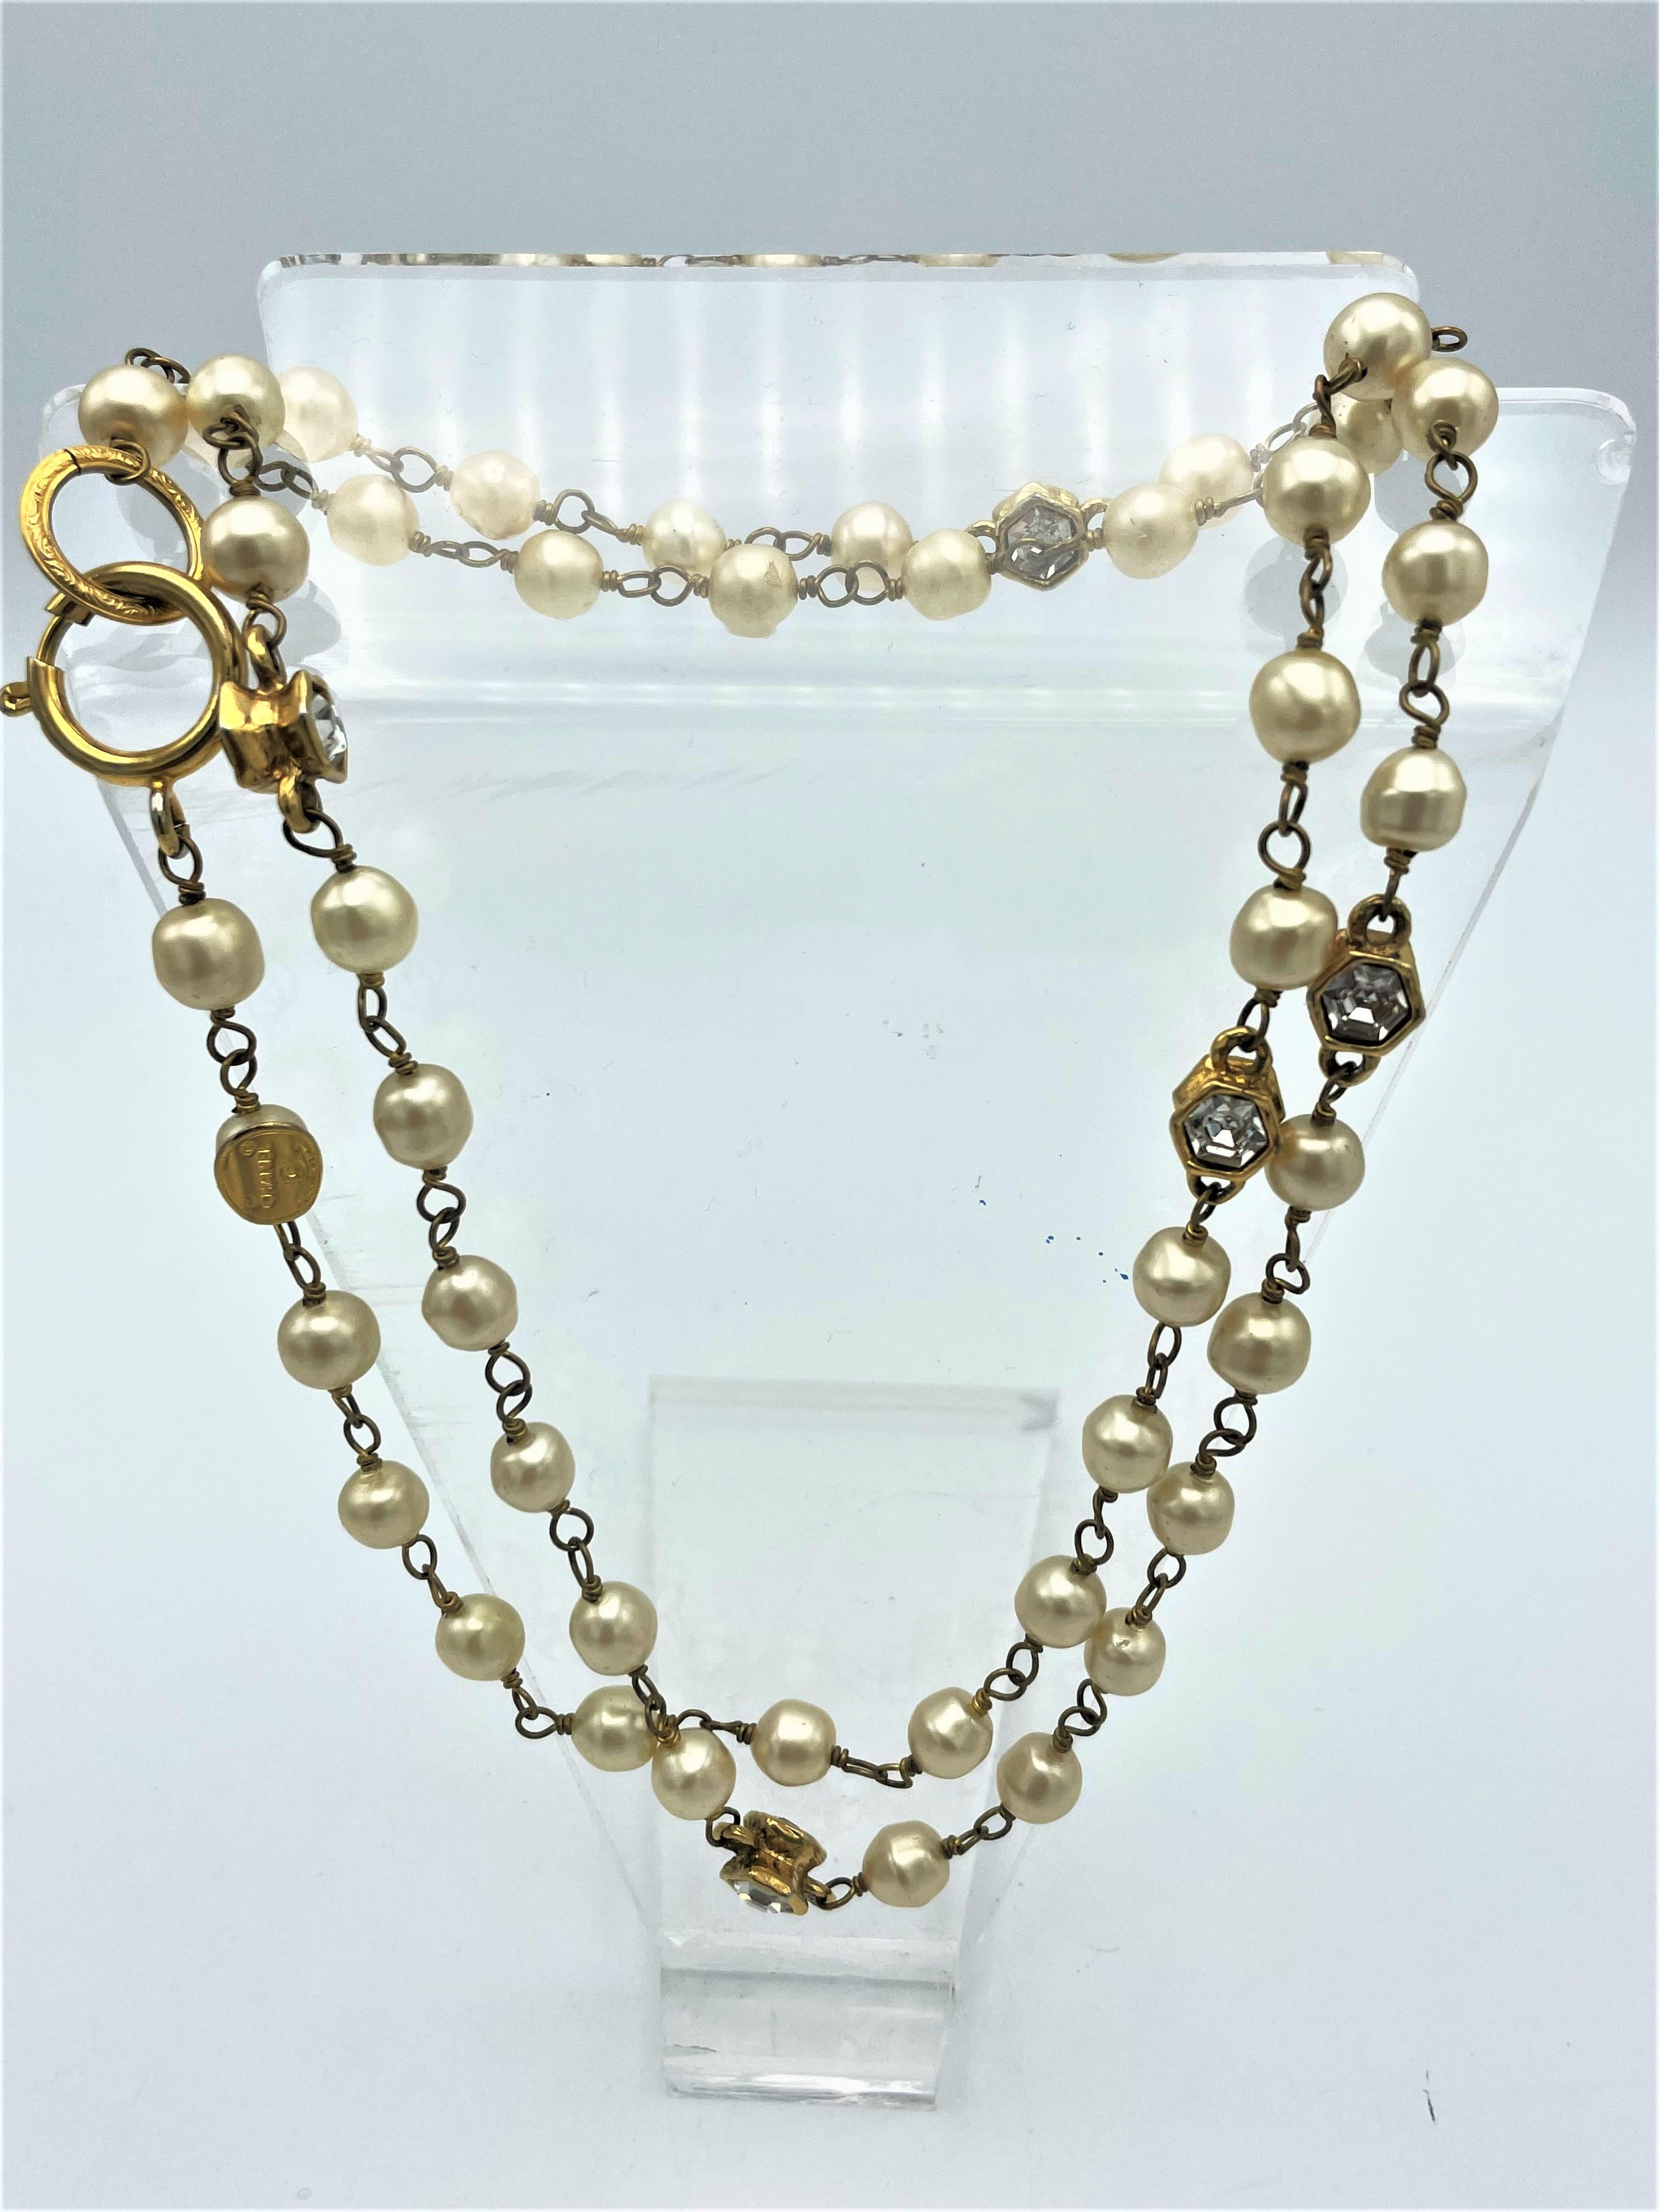 About
Chanel necklace with  false pearls and 5 hexagonal golden shapes with cut rhinestones, double-sided. 5 polished rhinestones on both sides, 10 mm high and width. Great to wear on any occassion. 
Measurement:
Length:  0,94 cm
Pearl size: 0,76 cm